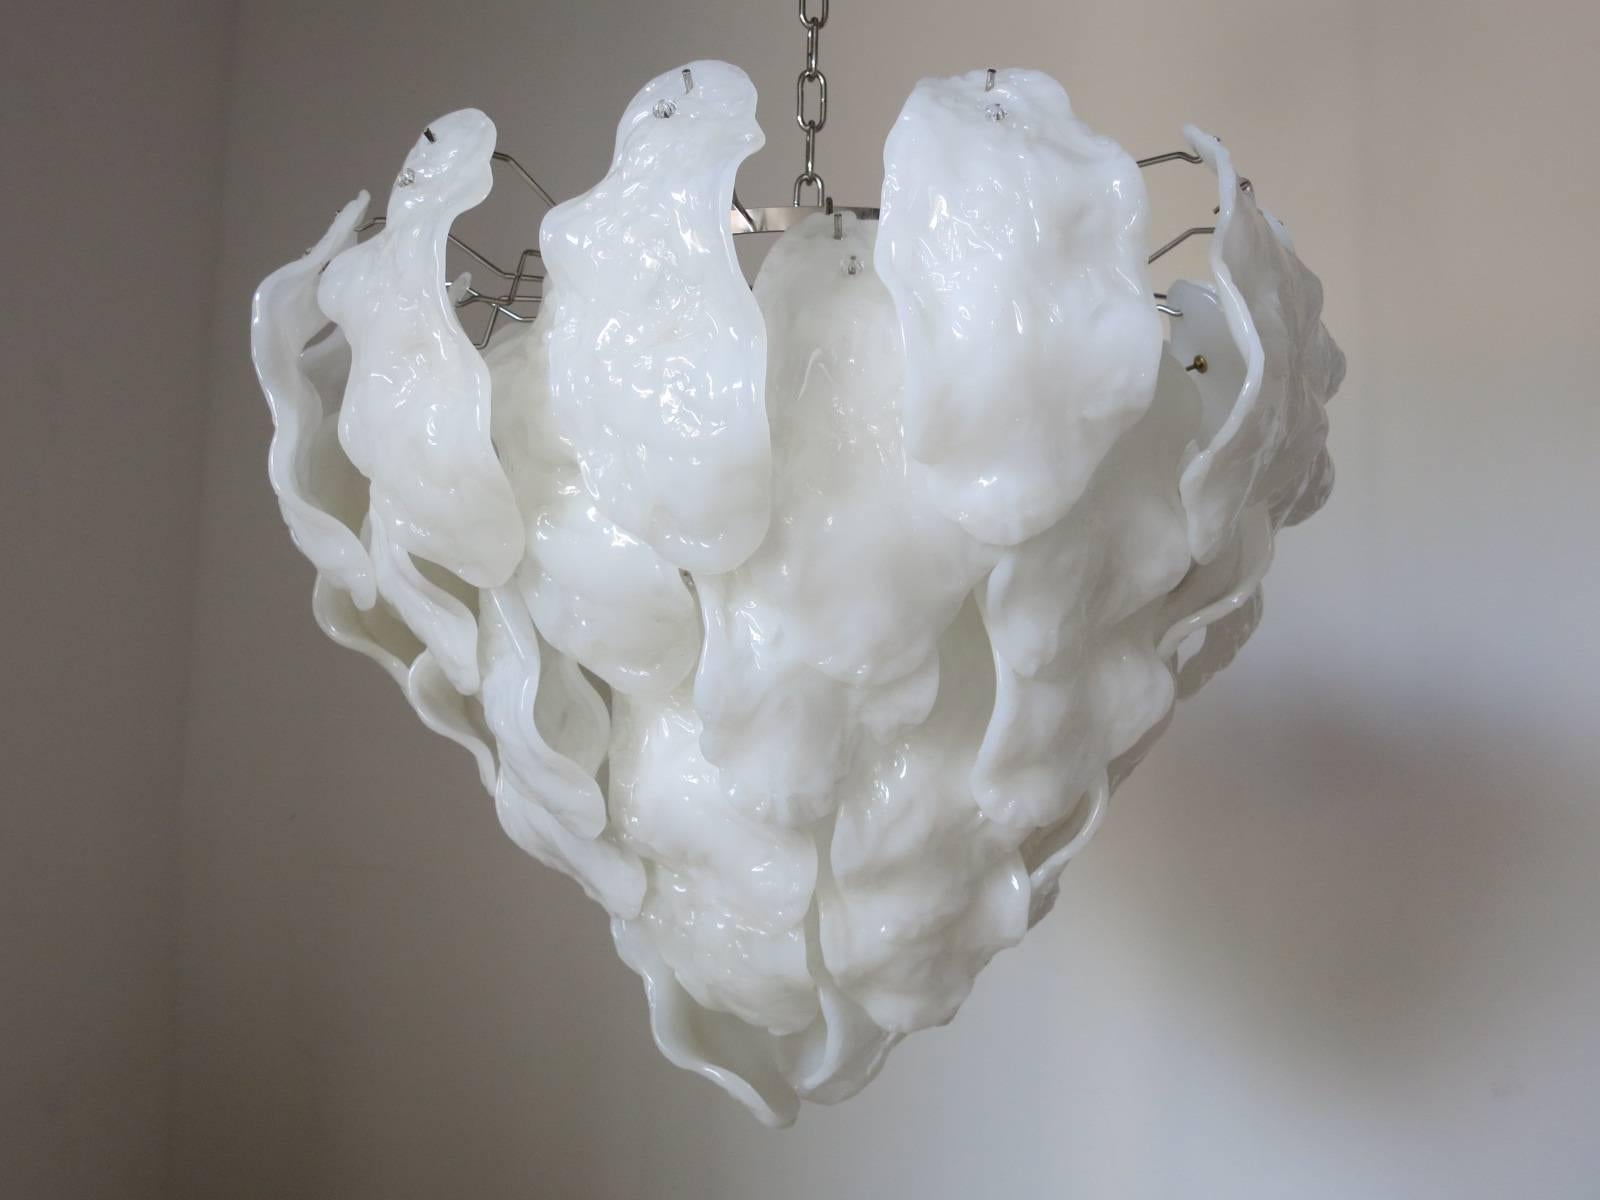 Italian milky Murano glass leaves chandelier by Mazzega.
Seven-light sockets; wired for the U.S.